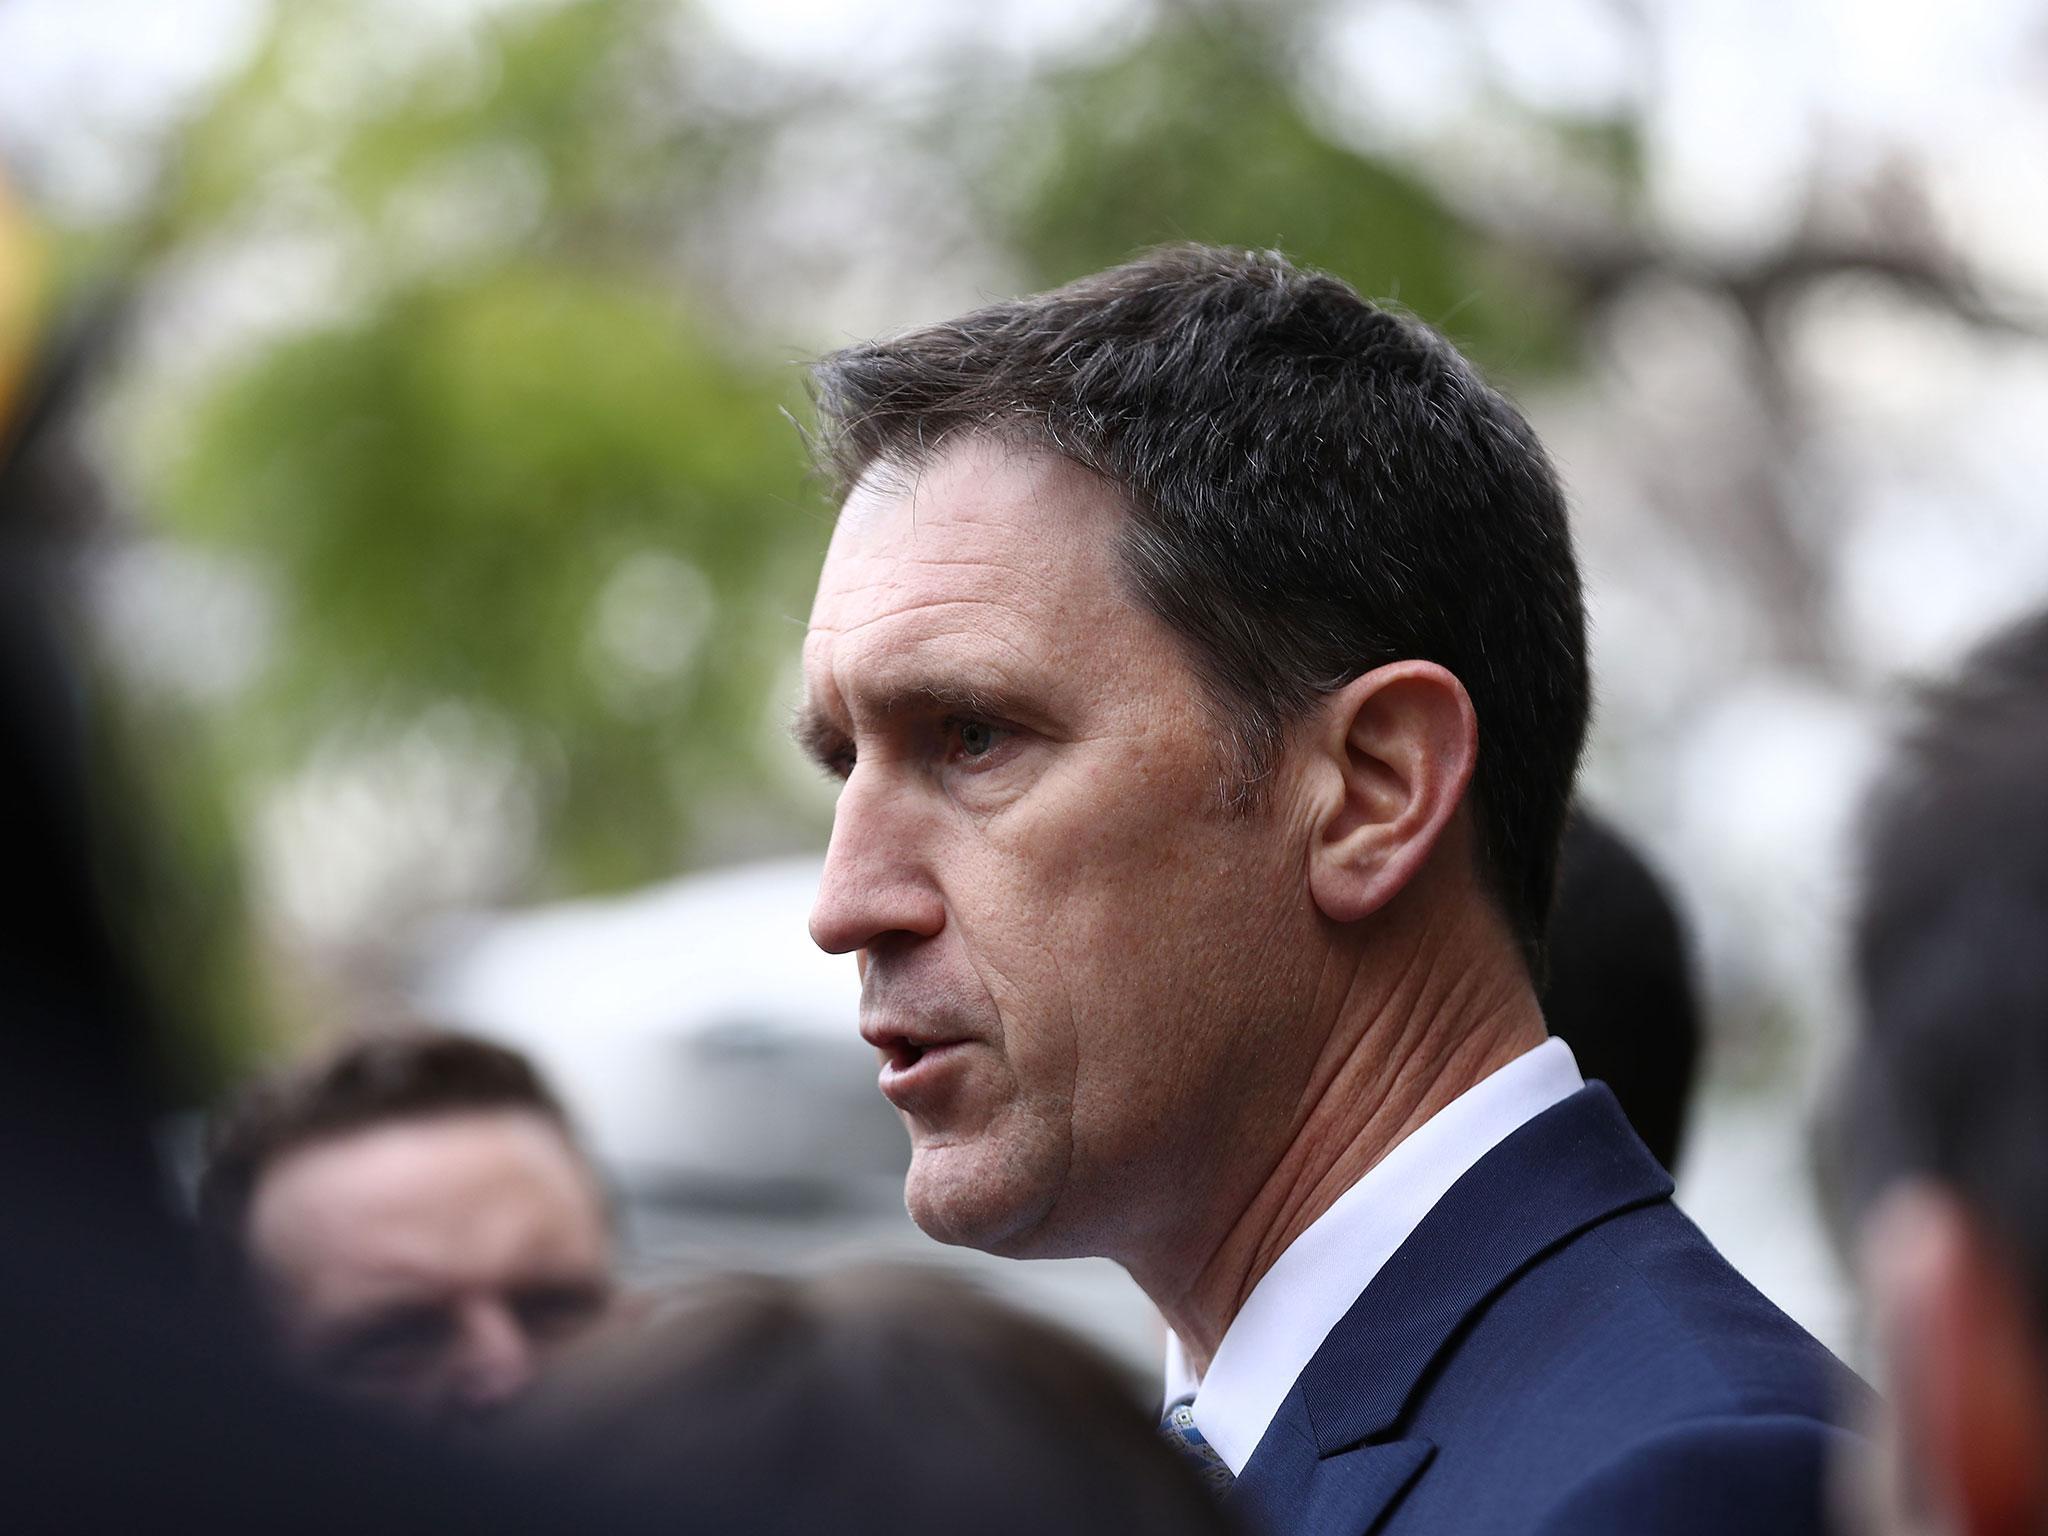 Cricket Australia chief executive James Sutherland delivered the news on Thursday